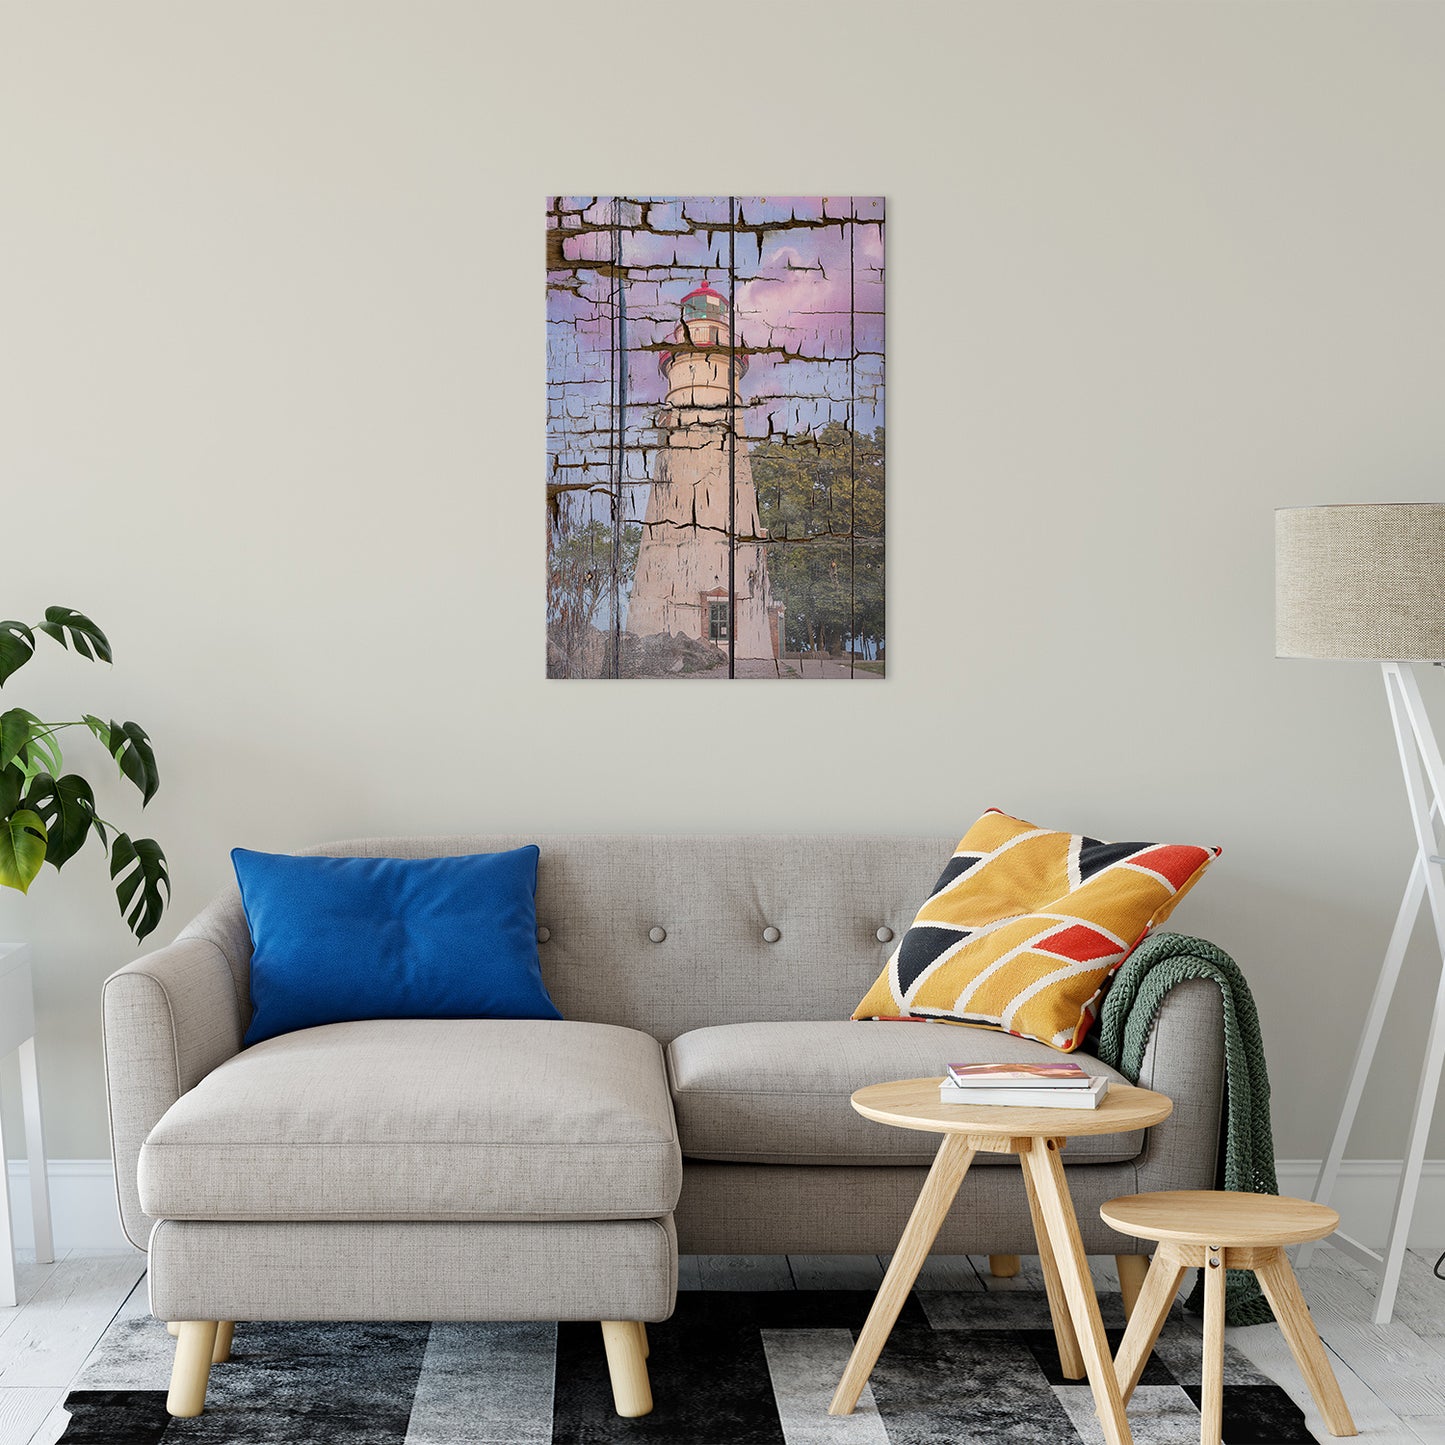 Faux Wood Texture Marblehead Lighthouse at Sunset Fine Art Canvas Wall Art Prints 24" x 36" - PIPAFINEART